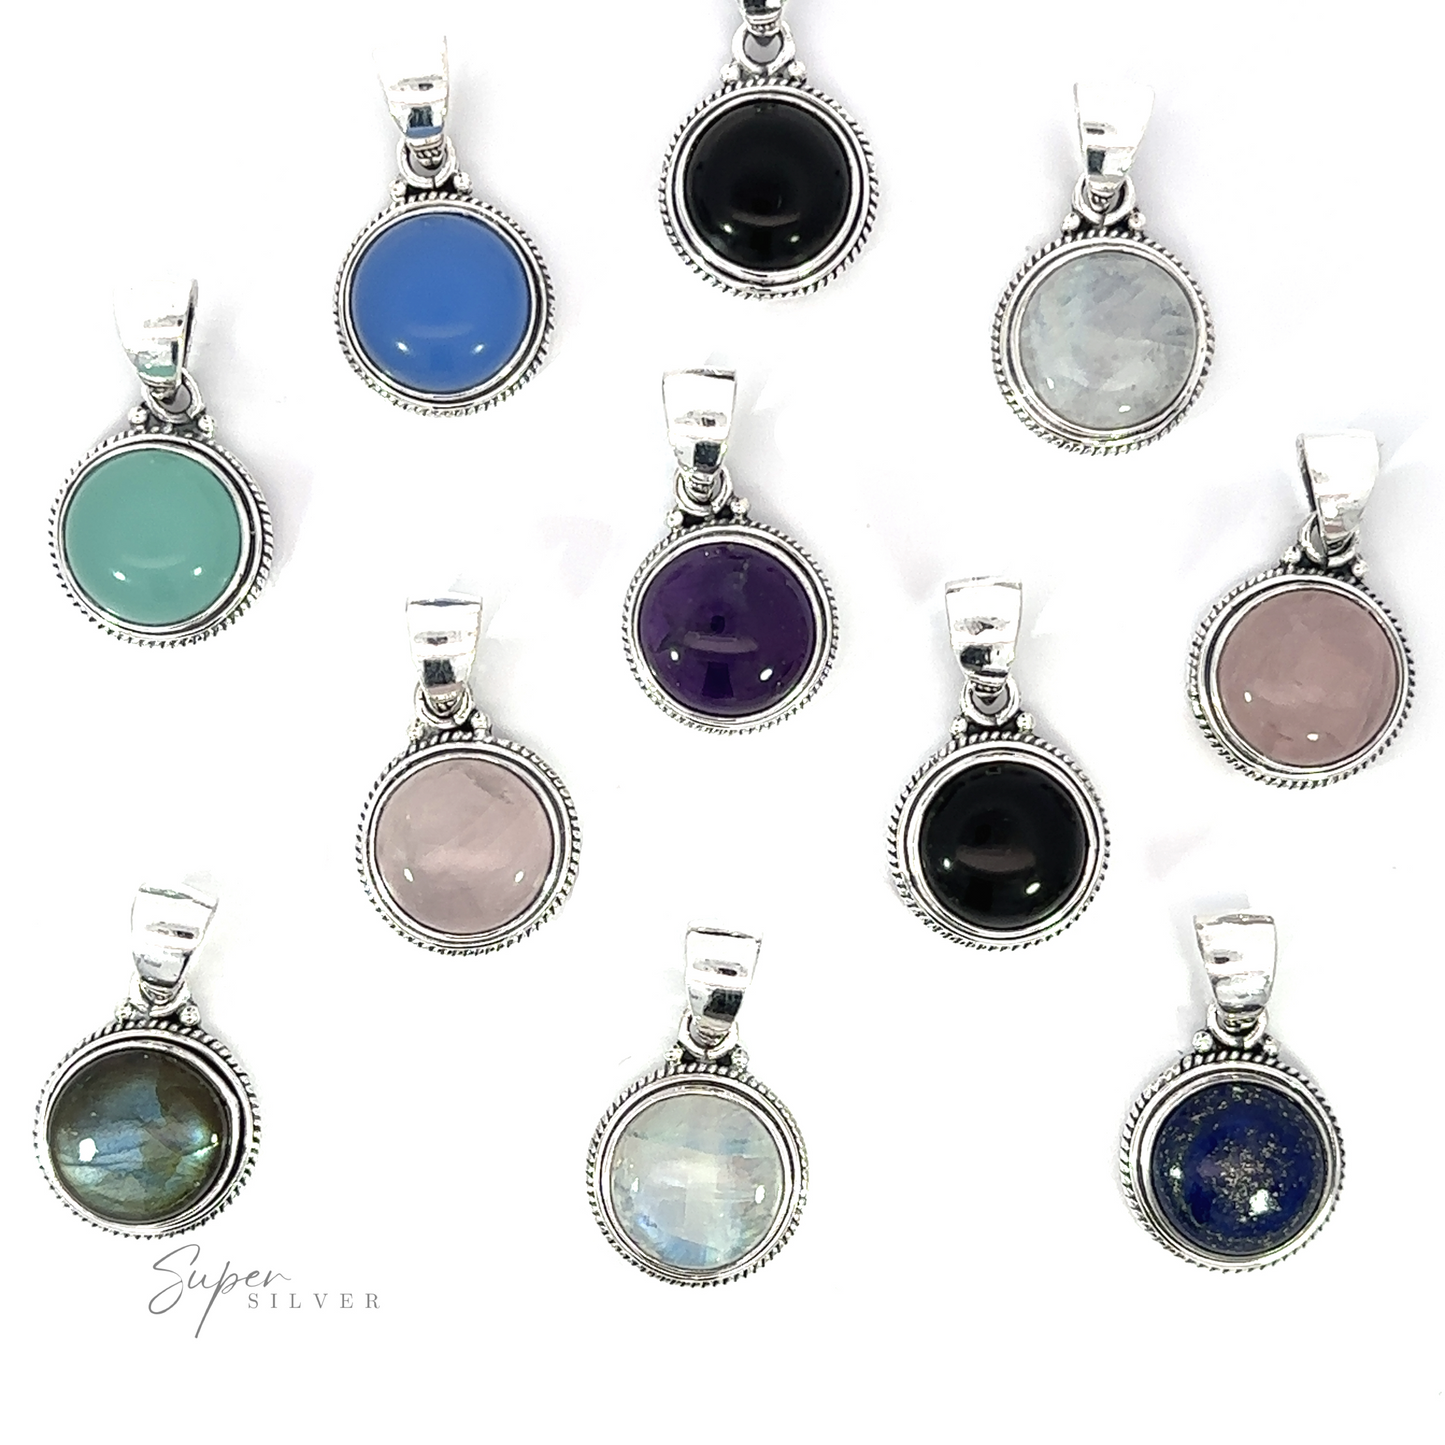 A group of Round Stone Pendant with Rope Border pendants on a white background.